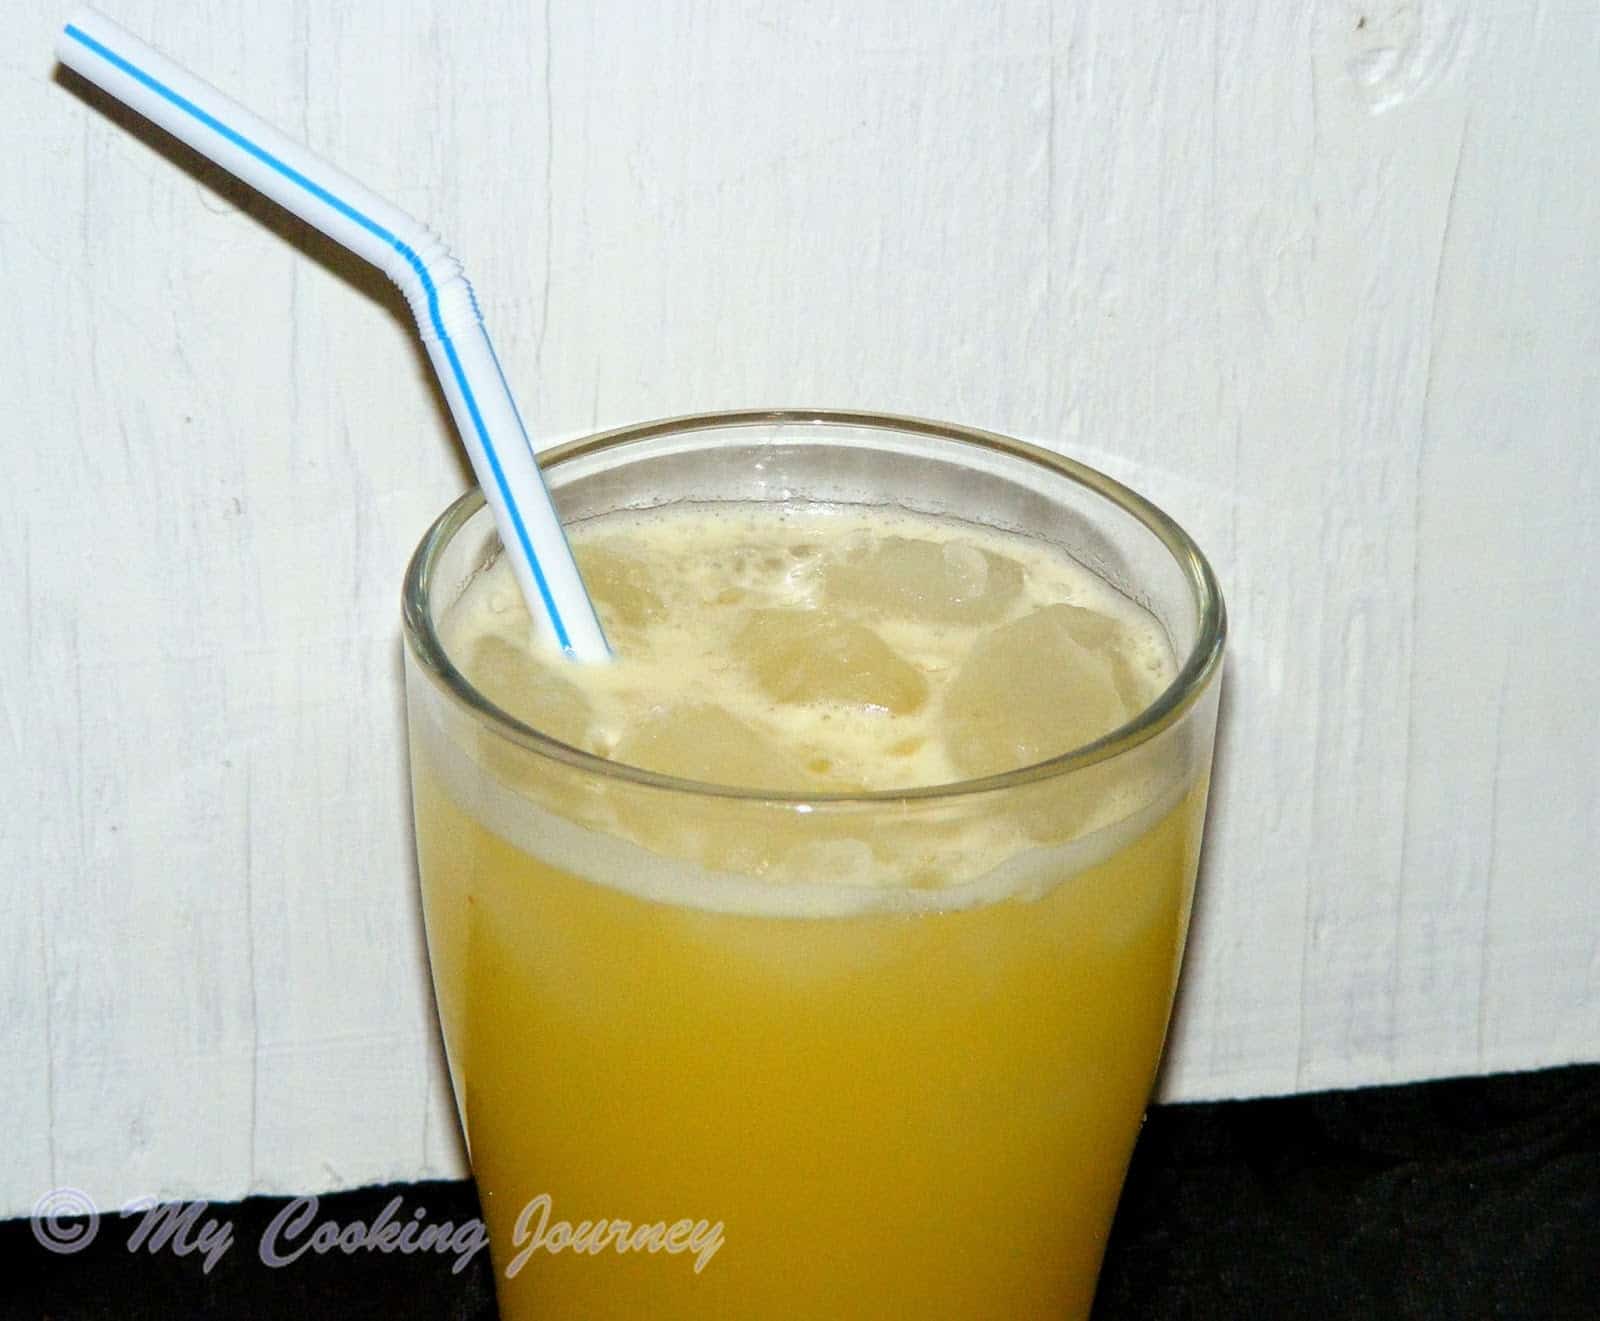 Ginger Beer in a glass with straw